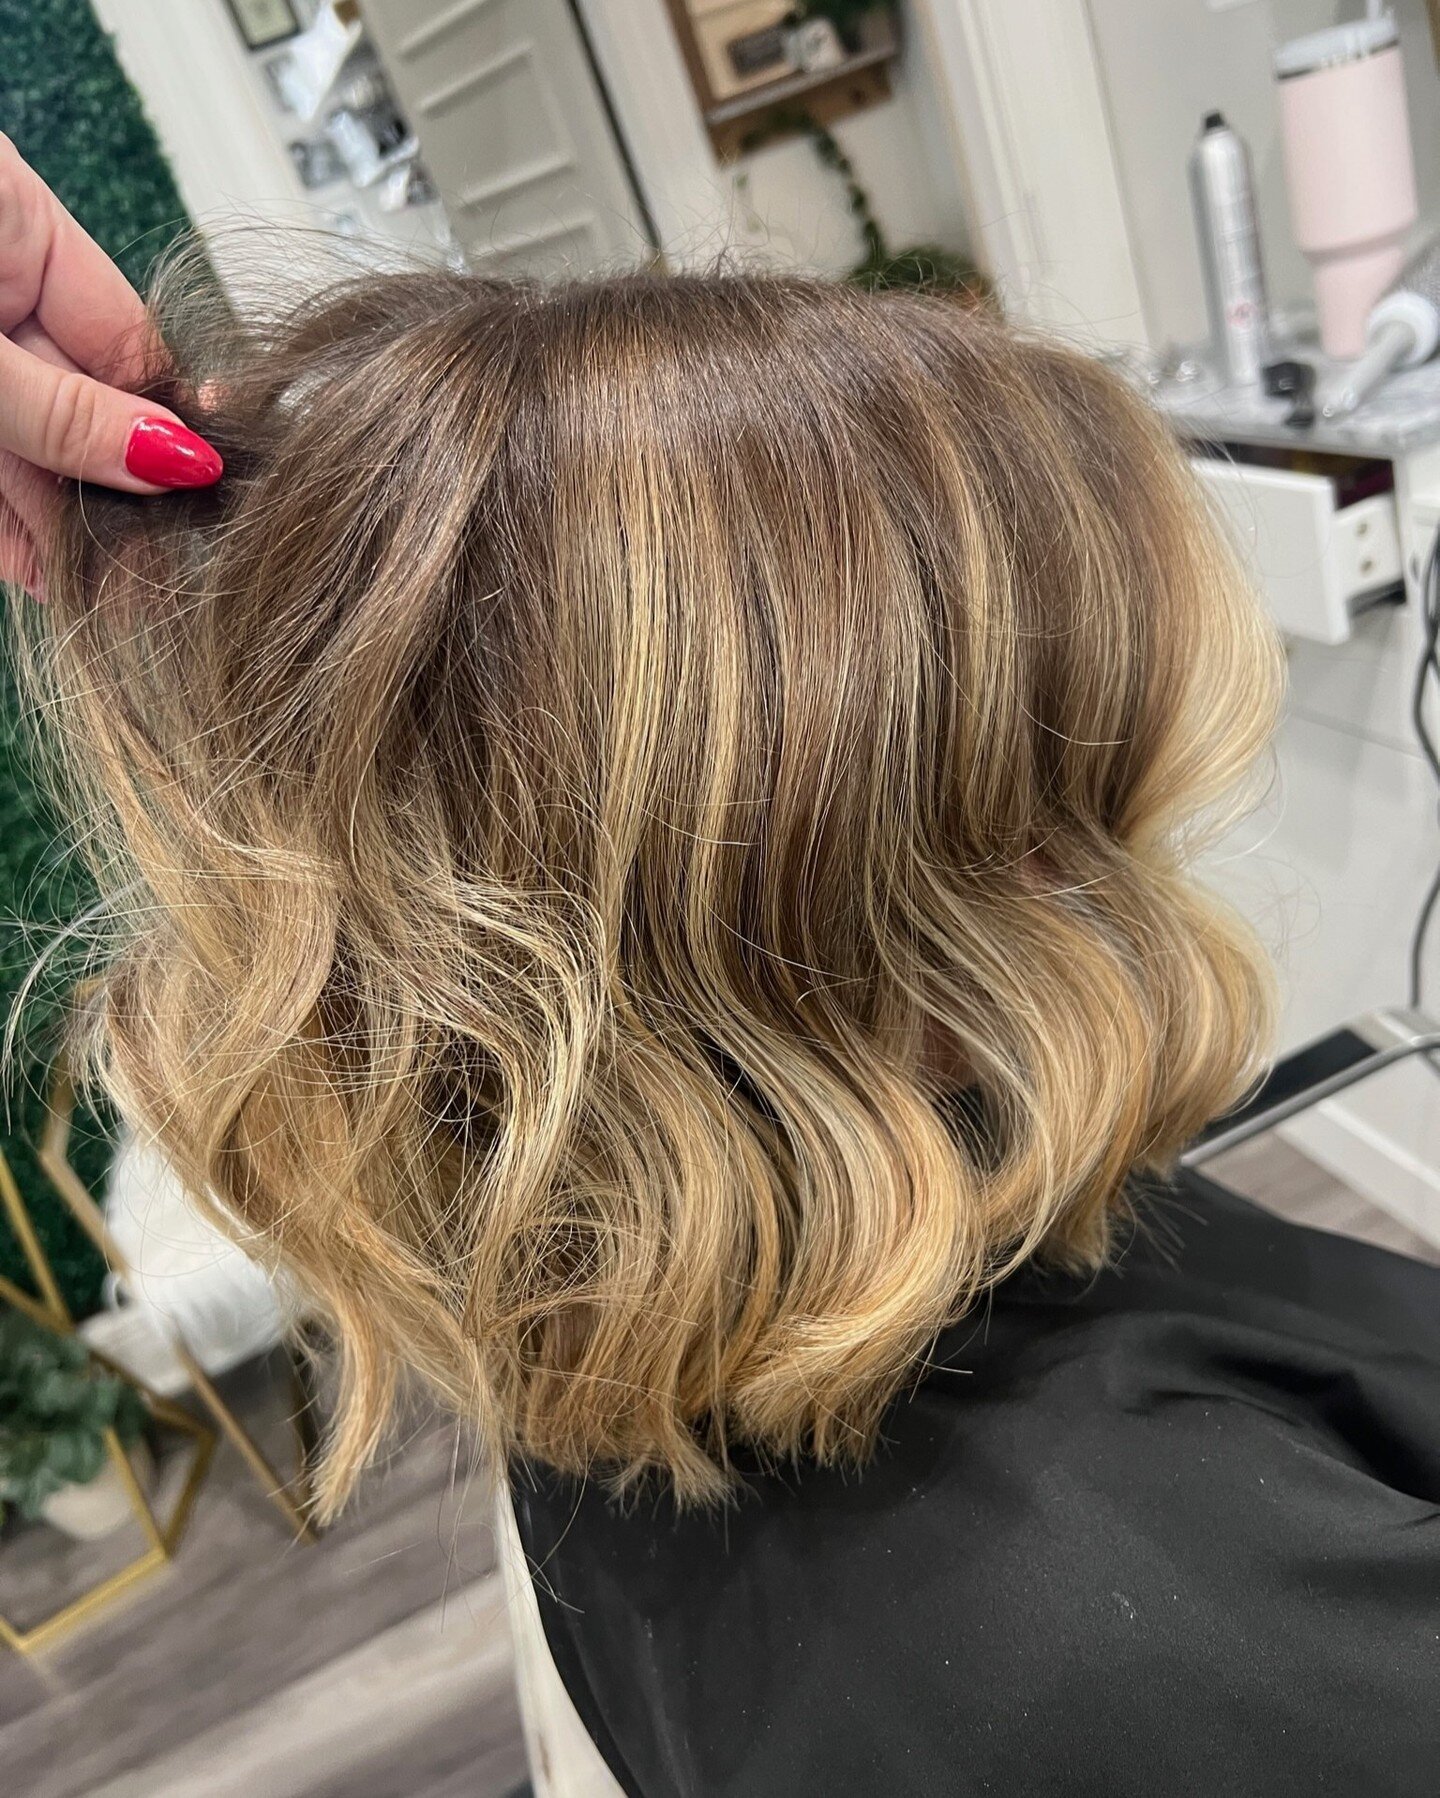 Shorter and blonder! ✨ Swipe left for the transformation! 

Cut + Color + Style by the talented @hairbytaylorcrandall 🤍

#hairtransformation #blondebombshell #hairbytaylorcrandall #nashvillehairstylist #fallhaircolor #shorthair #hairinspo #nashville